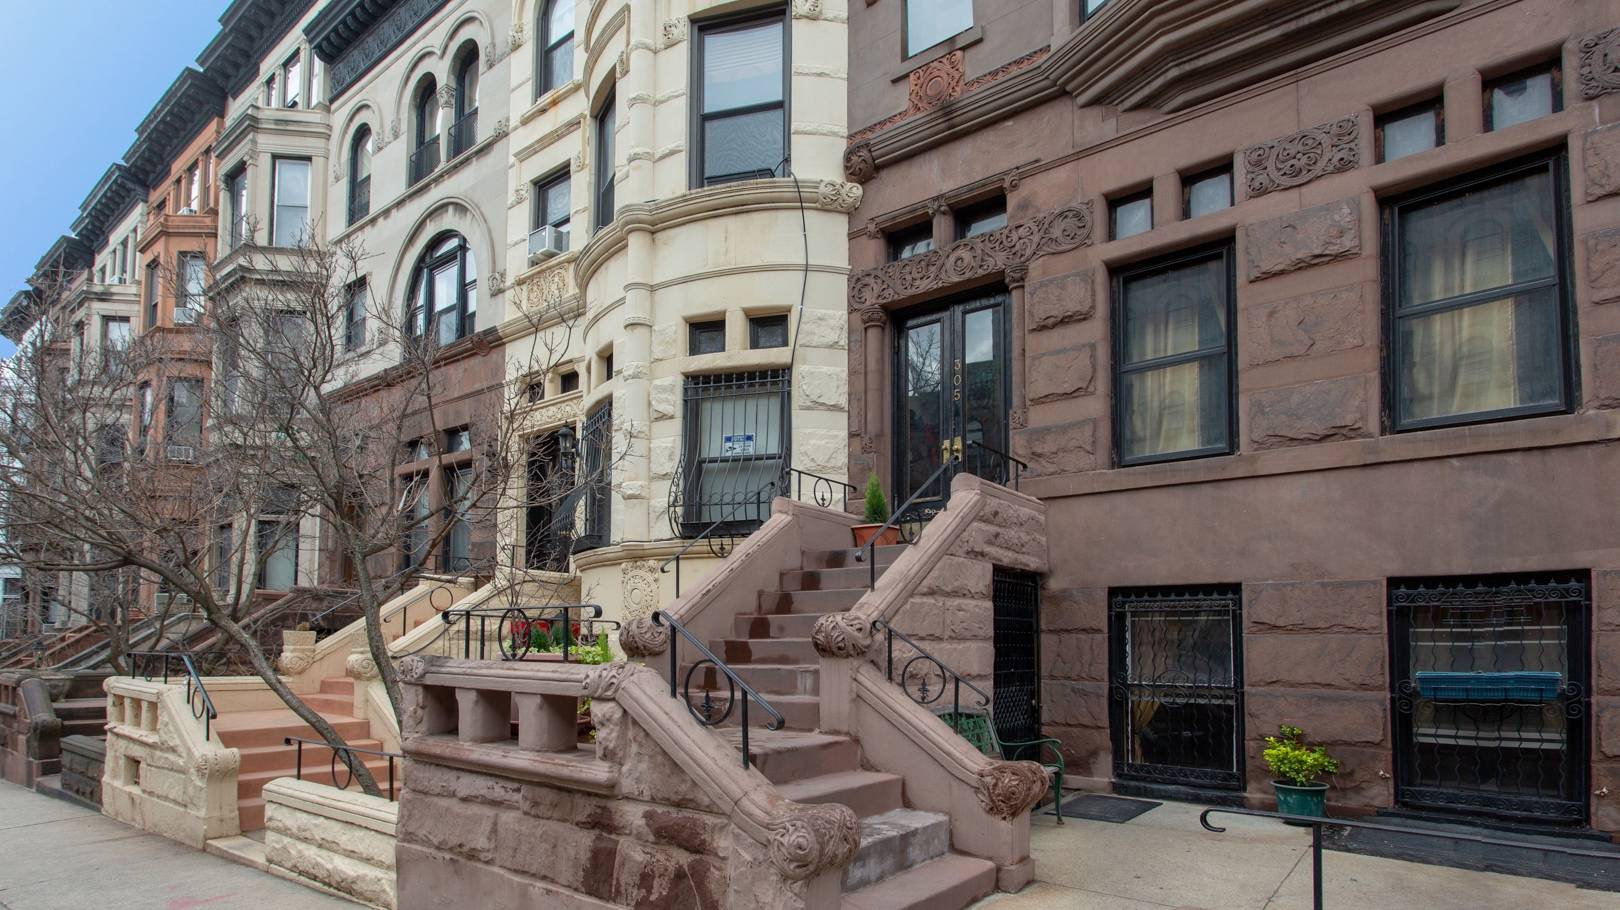 A blank canvas for your vision, this grand four level multi family brownstone awaits your loving restoration to its original splendor.